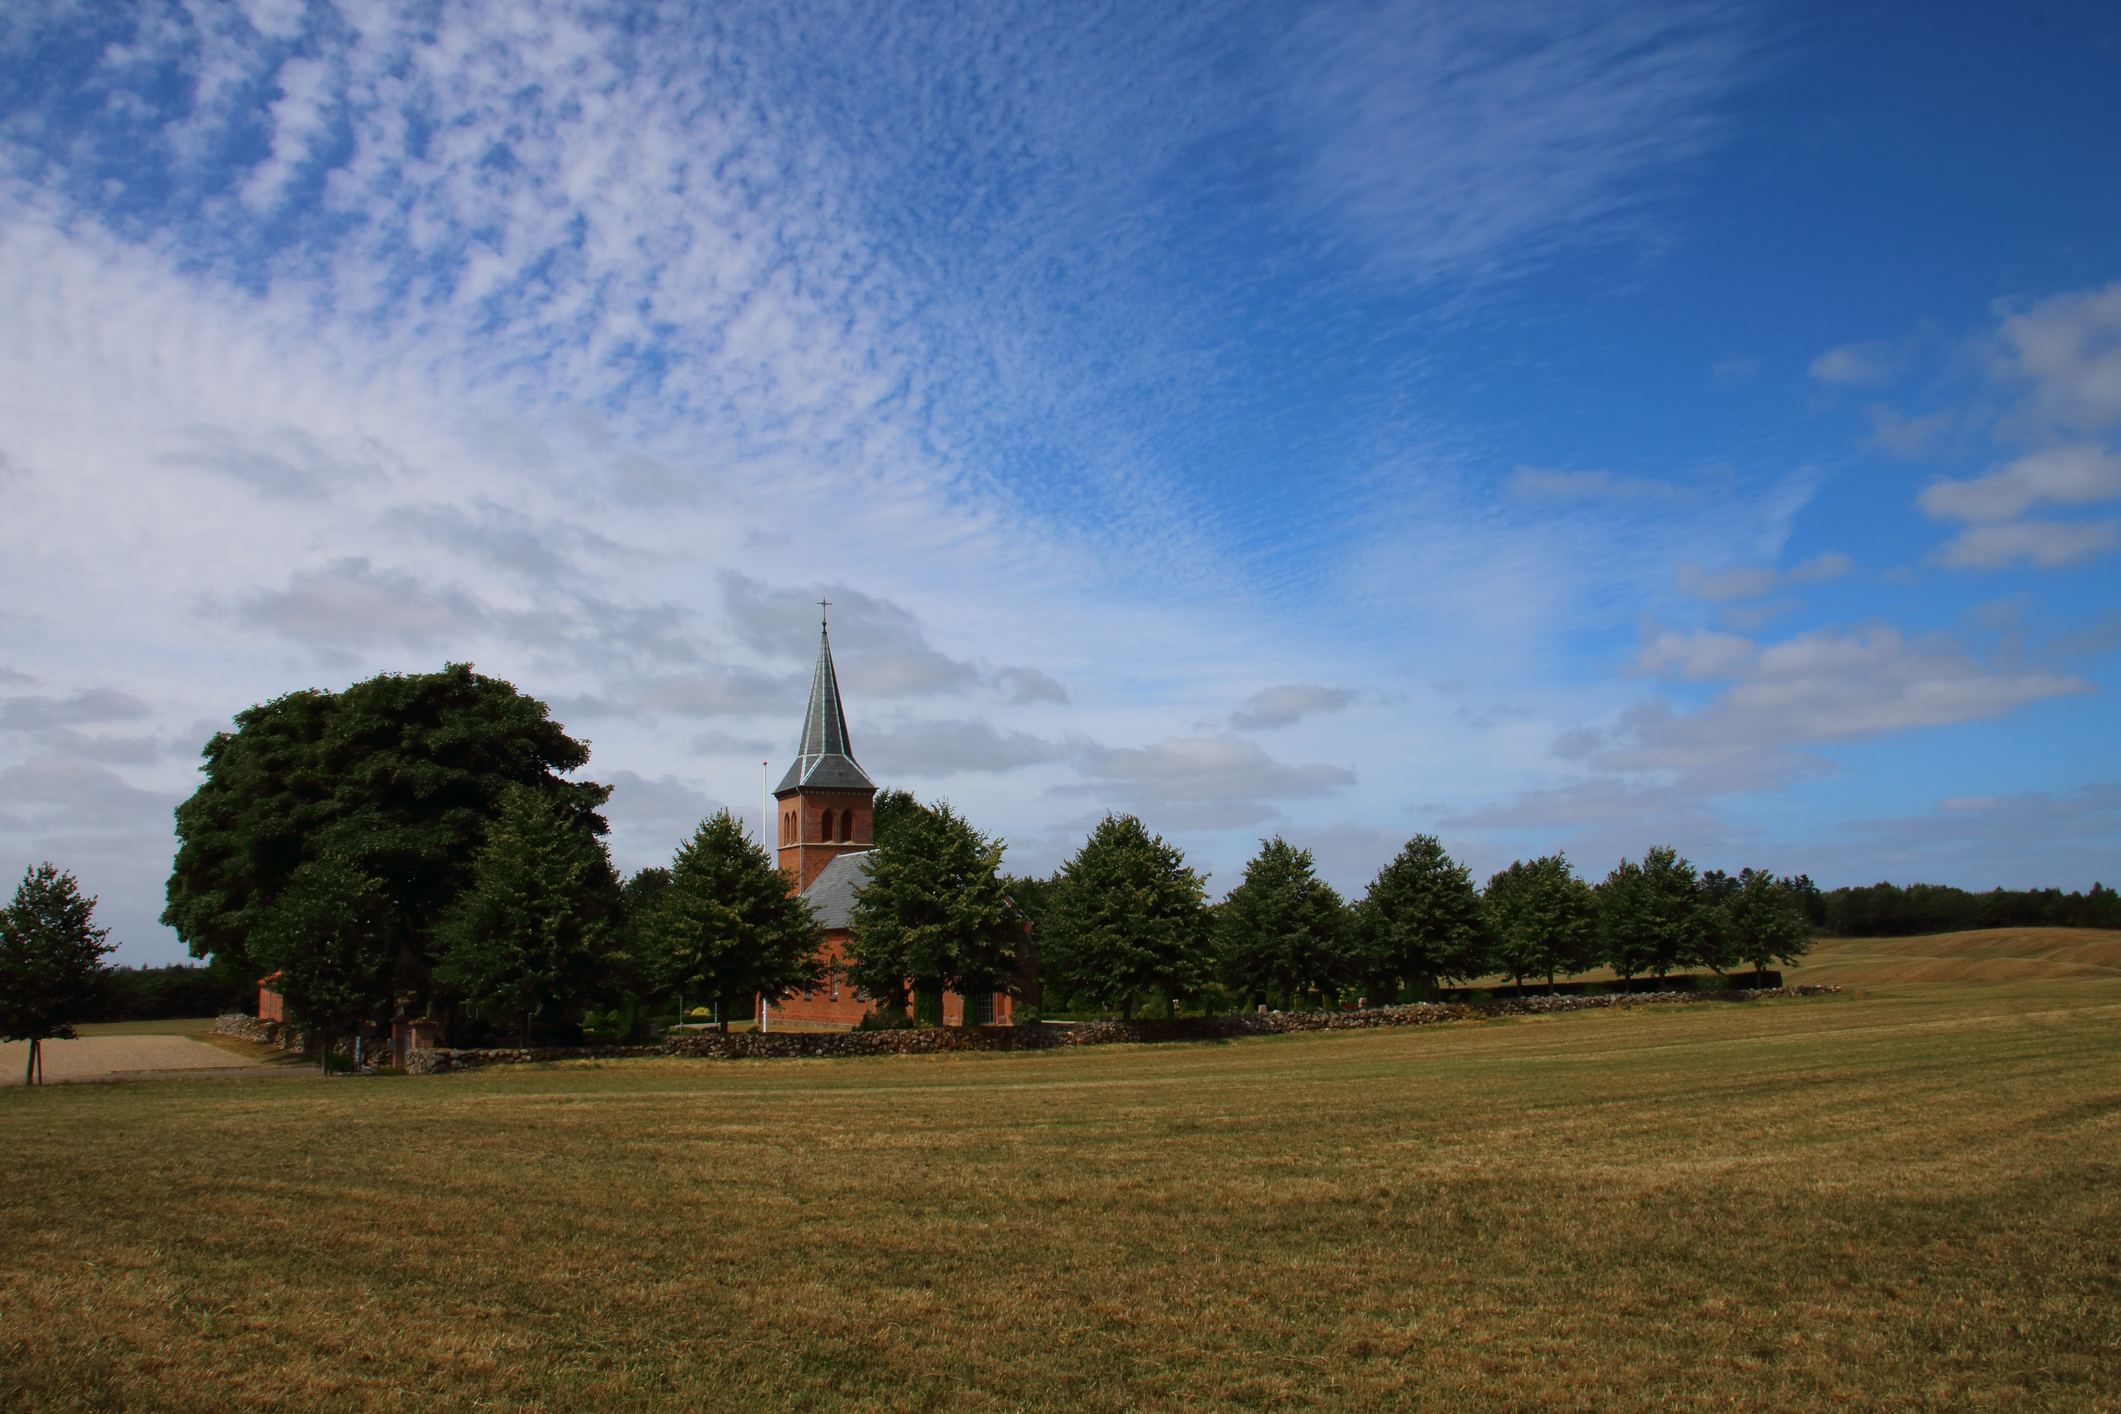 A church in Brande, Denmark, where a sky-high tower is being built. (Getty Images)